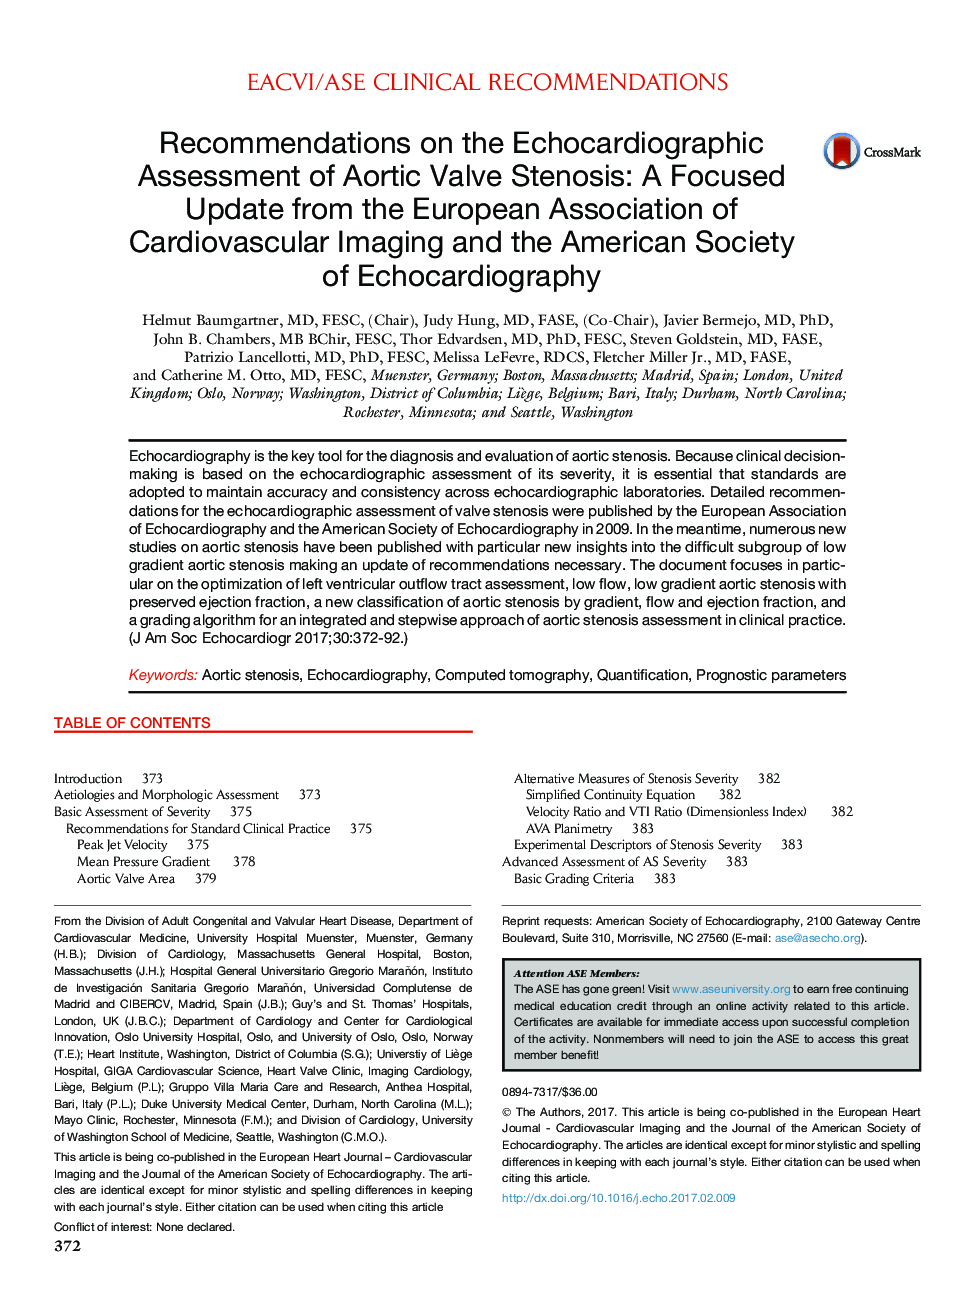 Recommendations on the Echocardiographic Assessment of Aortic Valve Stenosis: A Focused Update from the European Association of Cardiovascular Imaging and the American Society of Echocardiography